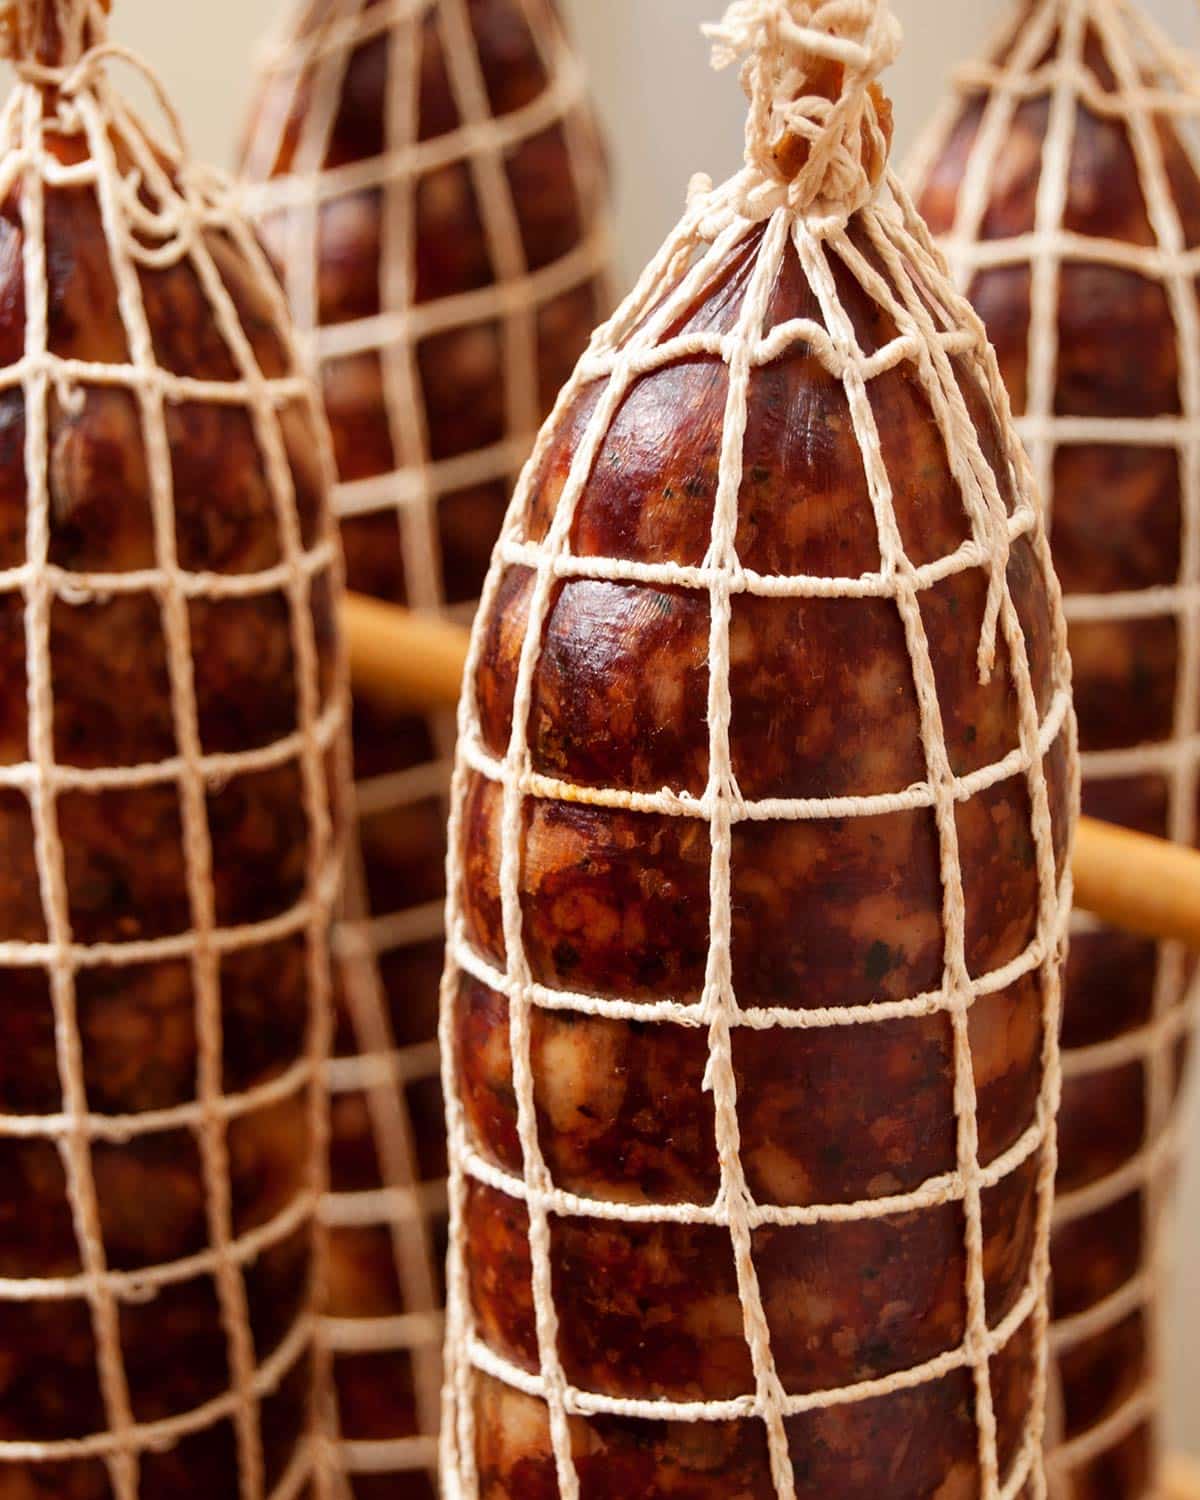 Wild boar salami netted and hanging to dry.